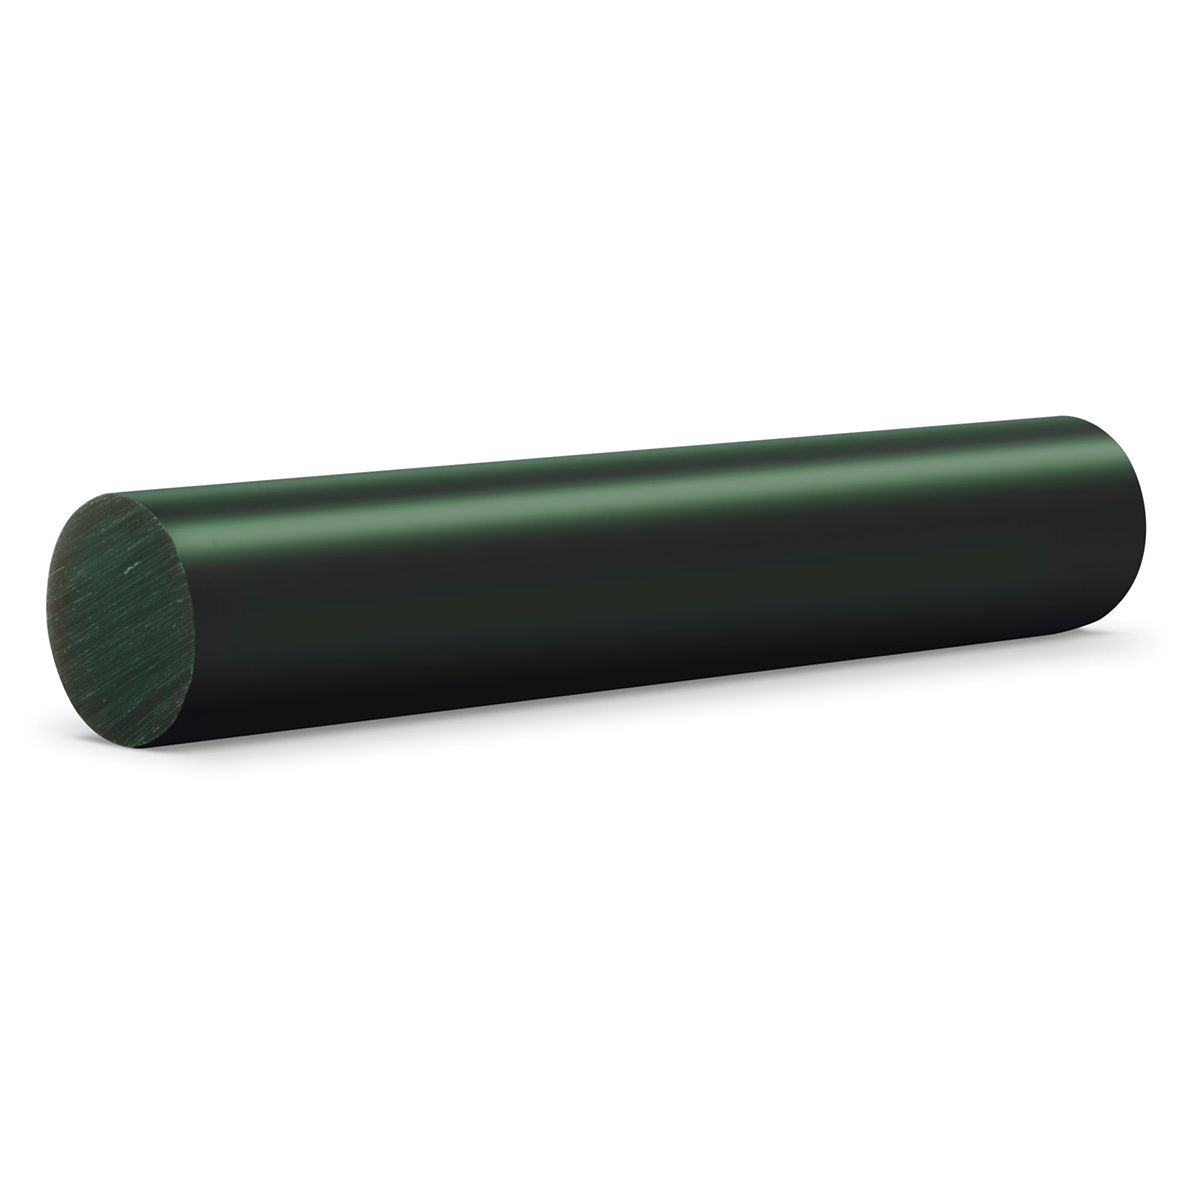 Carving wax tube, Ø 27 mm, round solid, green, hard